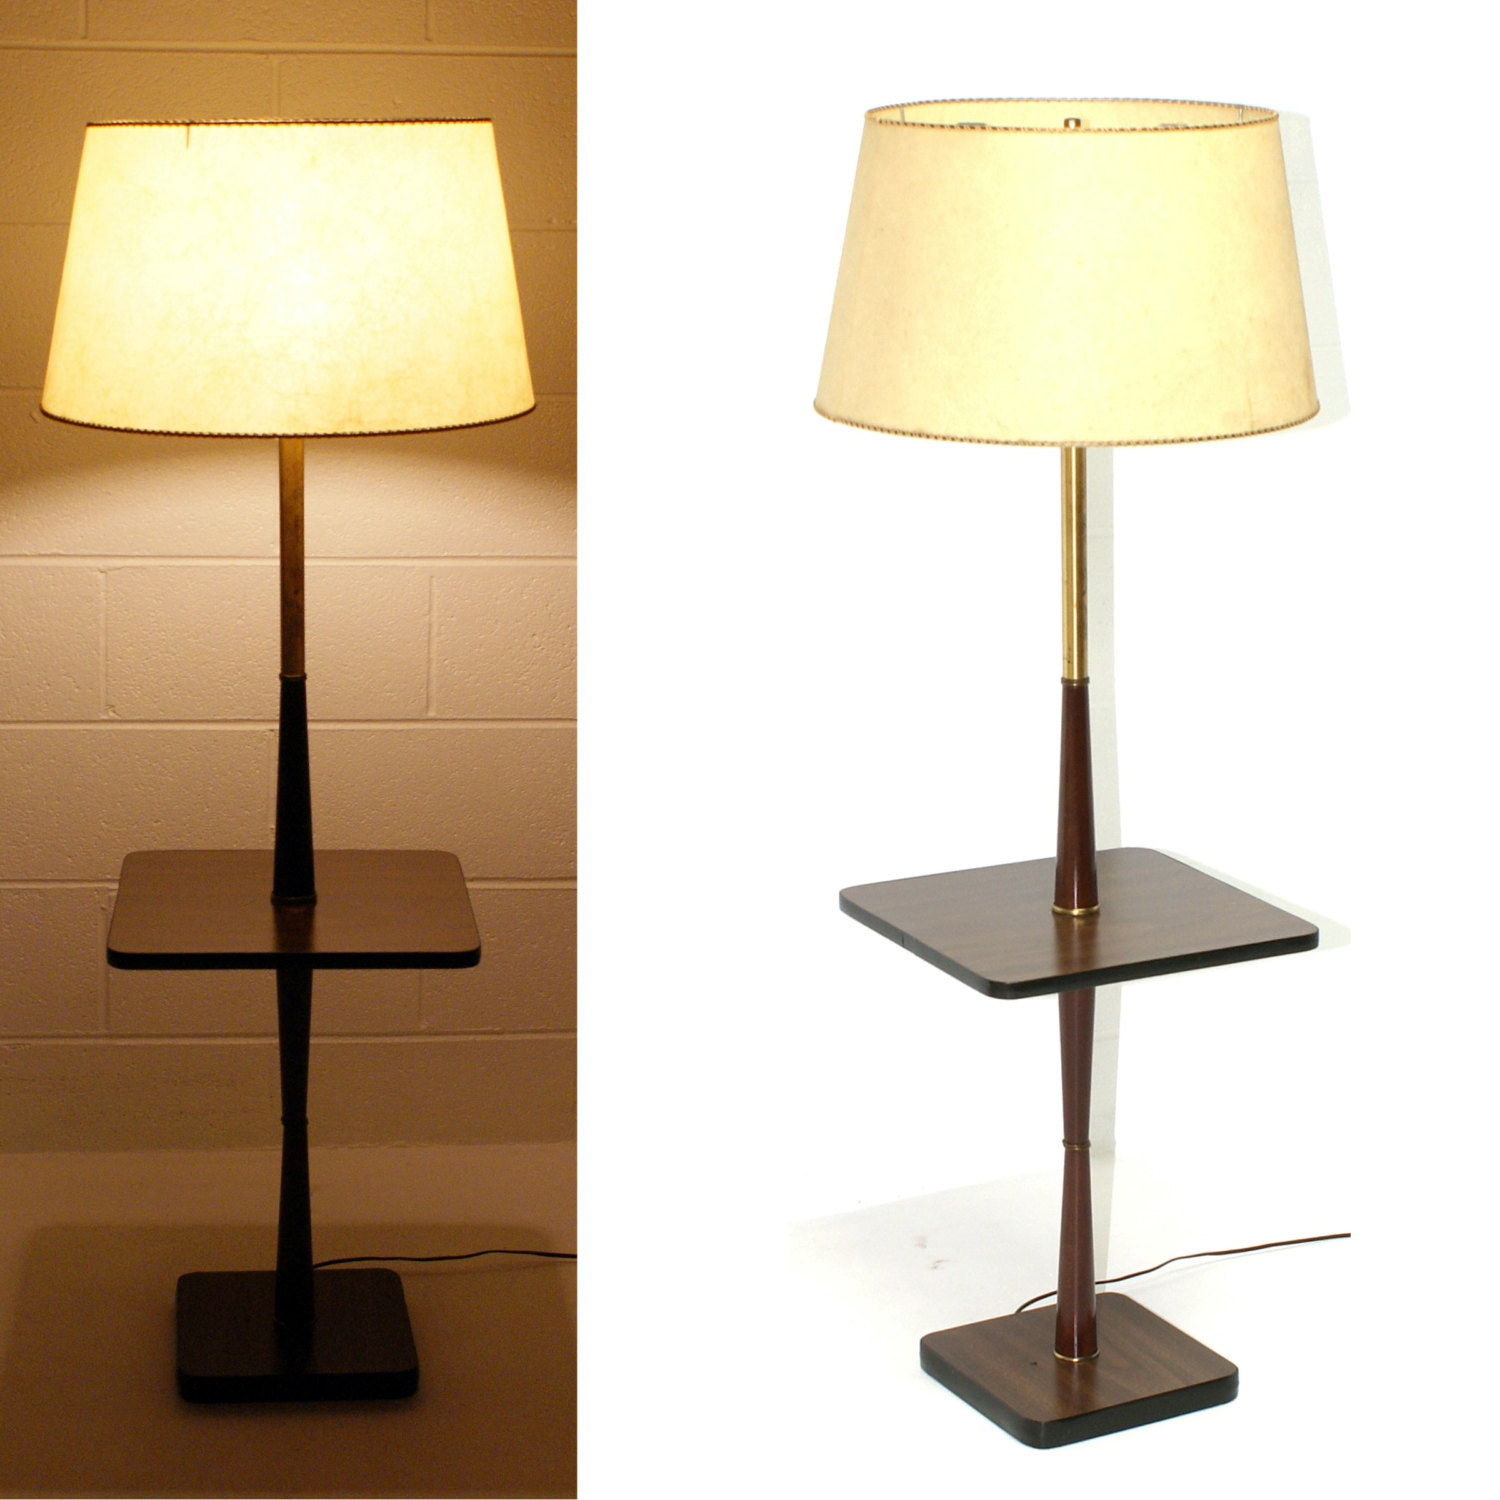 End Table With Lamp Attached Side Tables Lamps Floor for dimensions 1500 X 1500